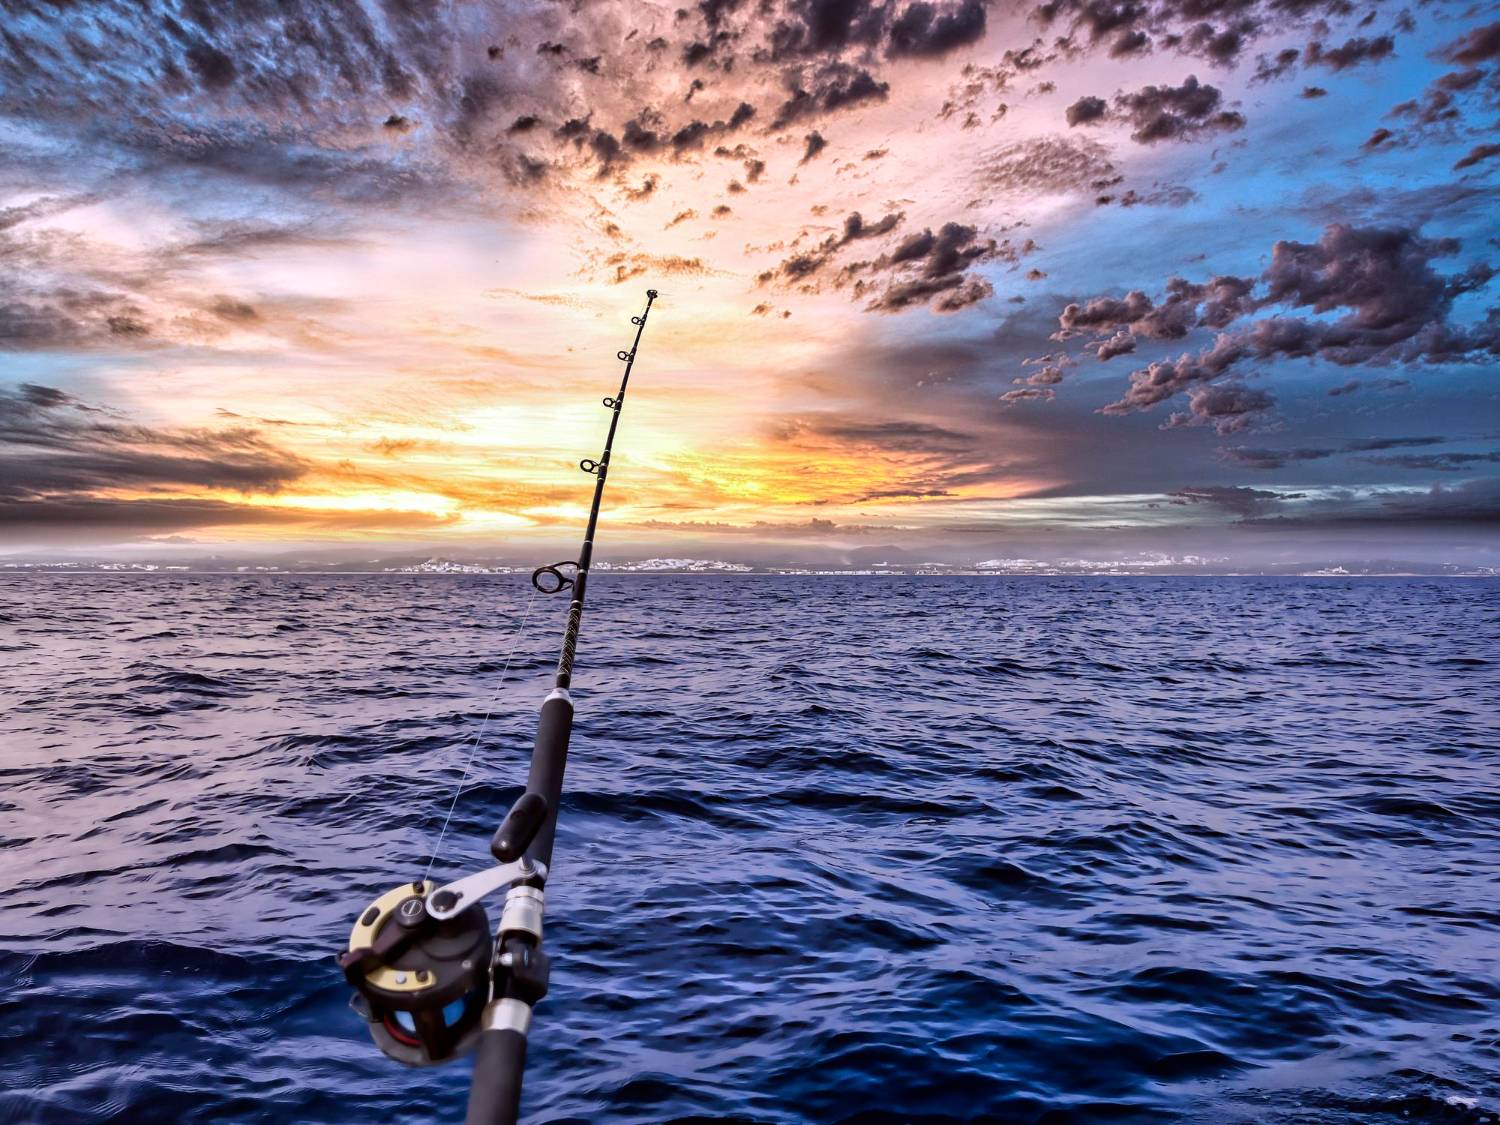 A fishing rod cast into the Gulf waters at sunset, symbolizing the ultimate fishing in the Gulf experience with breathtaking views.